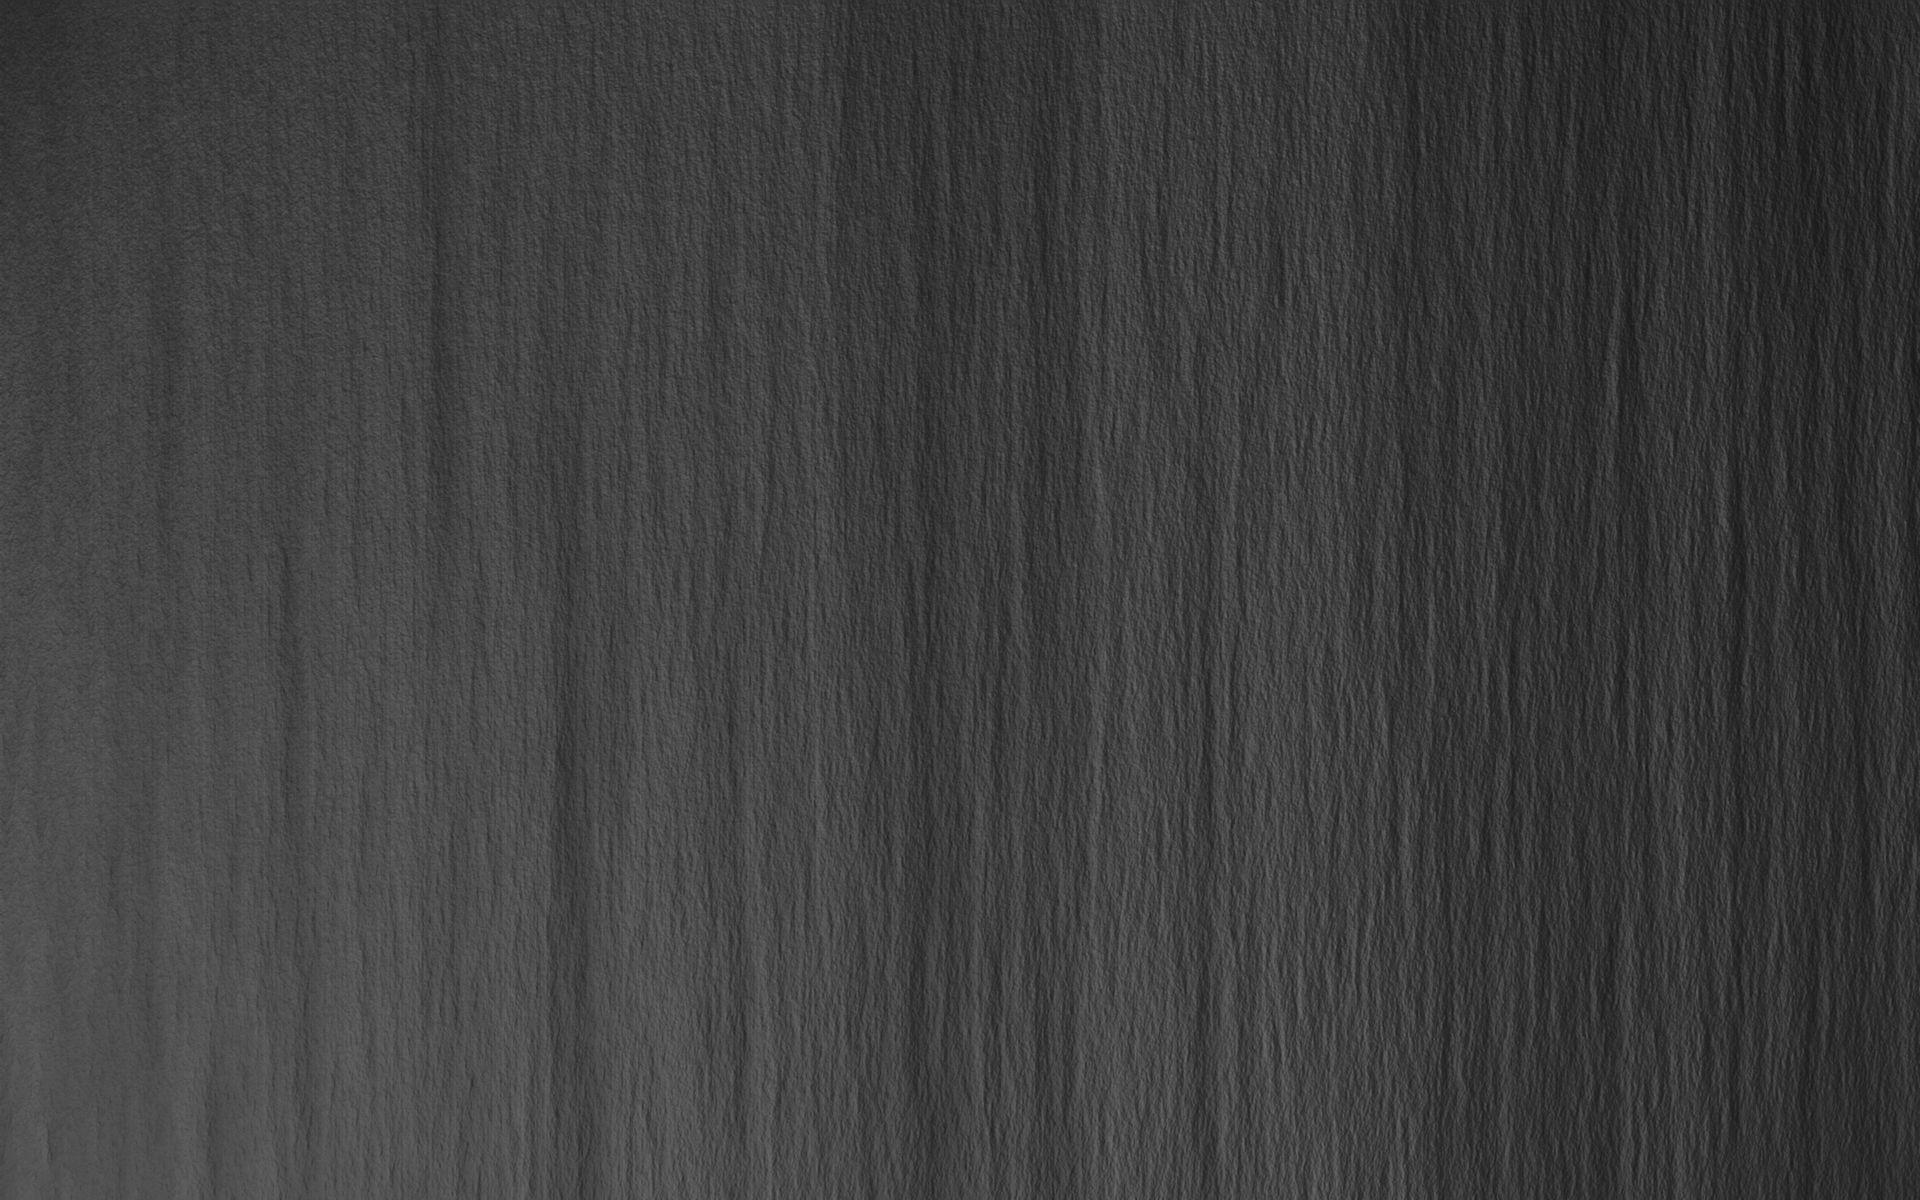 Grey Wall Full HD Wallpaper Background Image Picture Gallery. Grey wallpaper, Dark grey background, Gray background